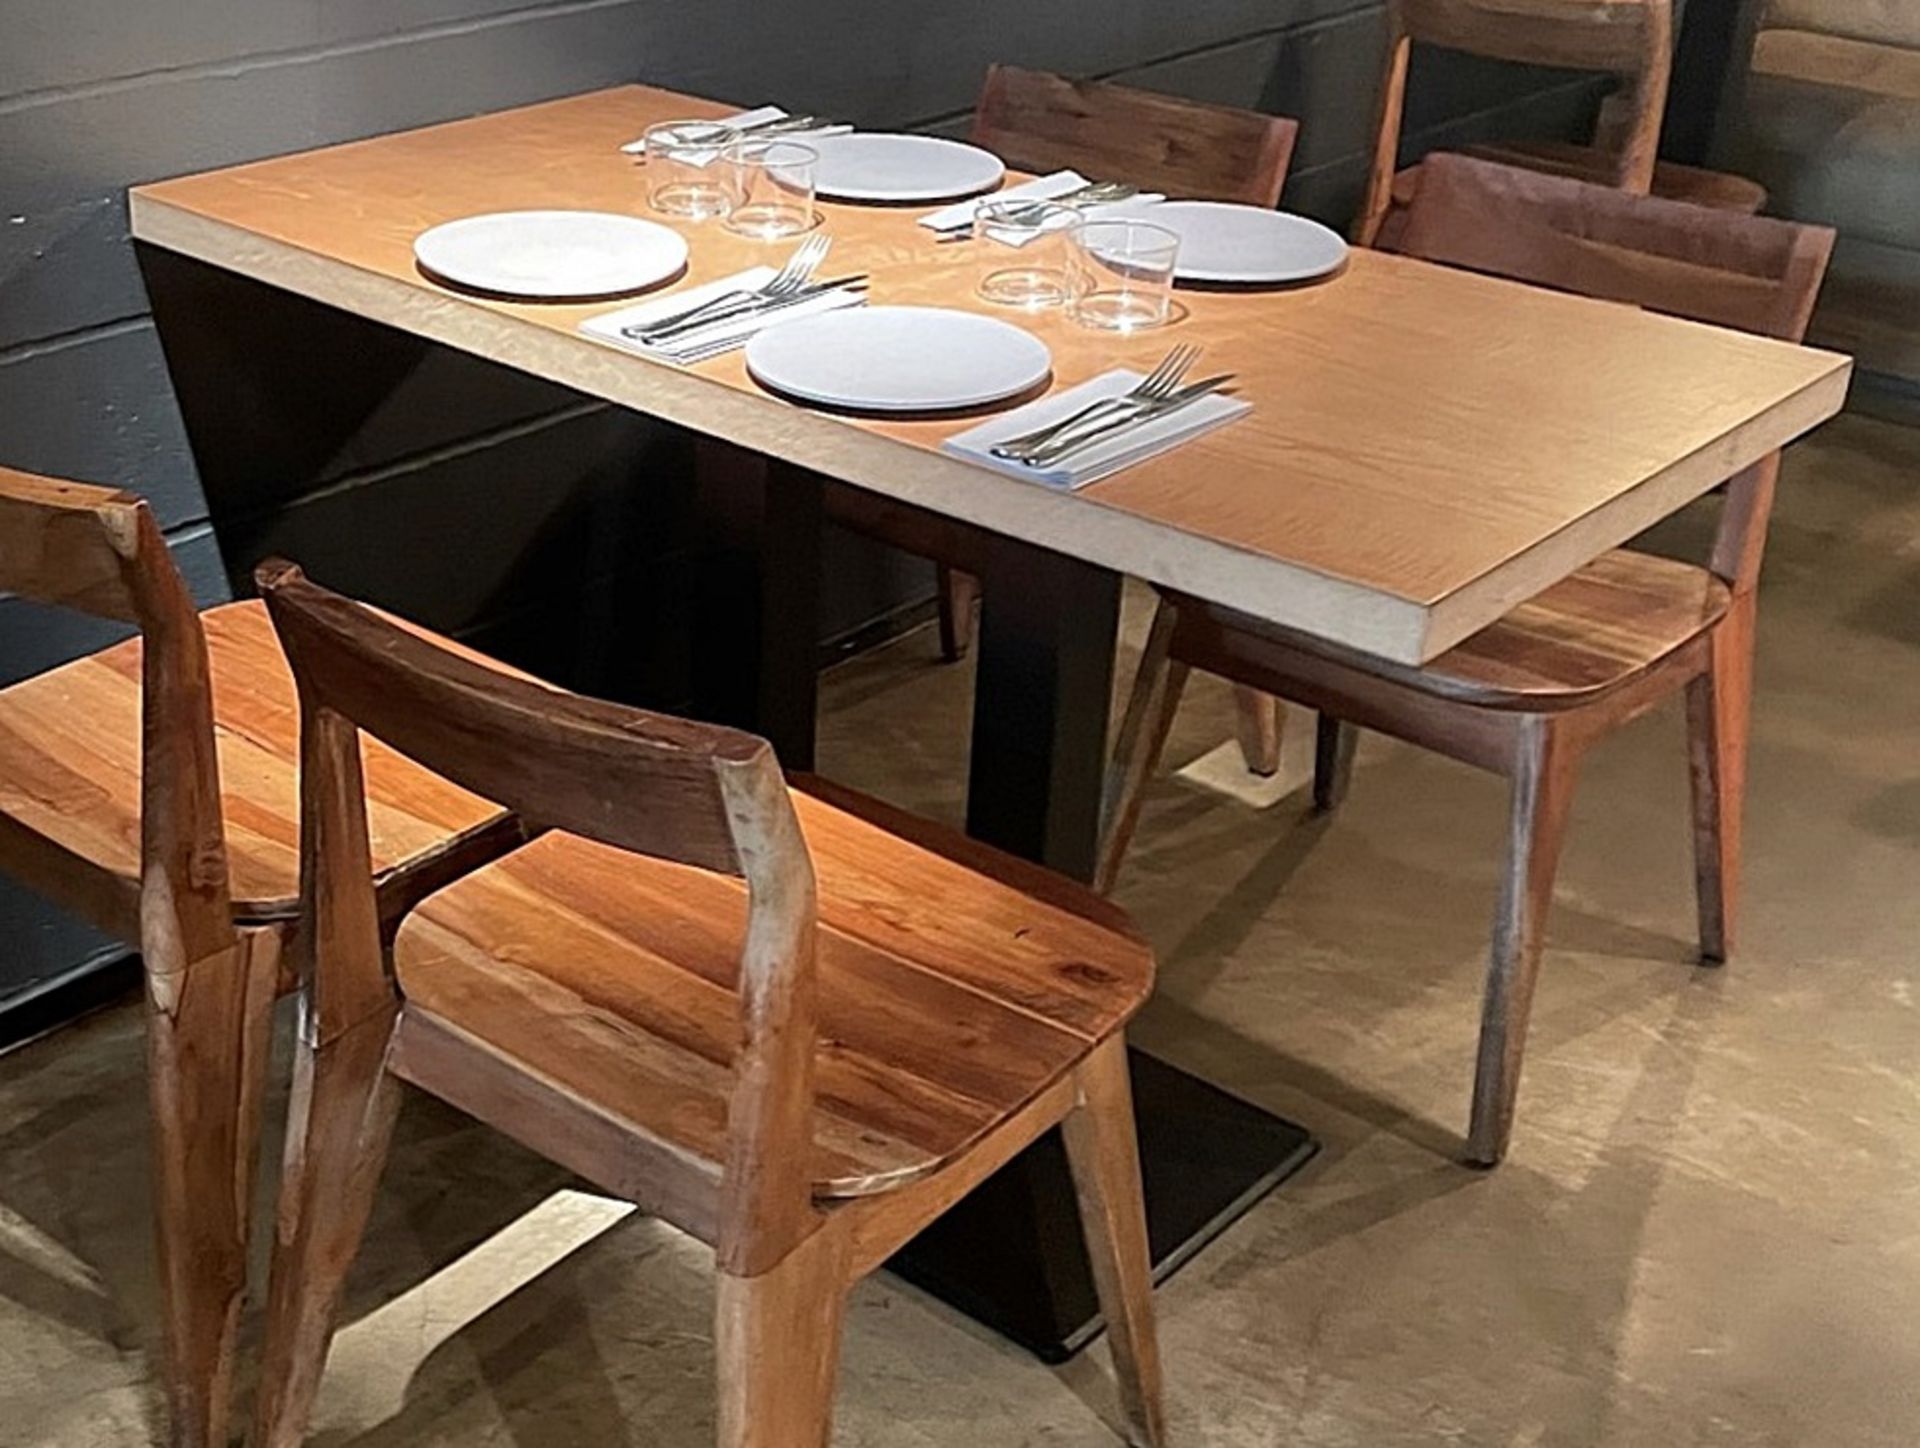 3 x Rectangular Wood-Topped Bistro Tables With Sturdy Metal Bases - Dimensions (approx): 120 x 60